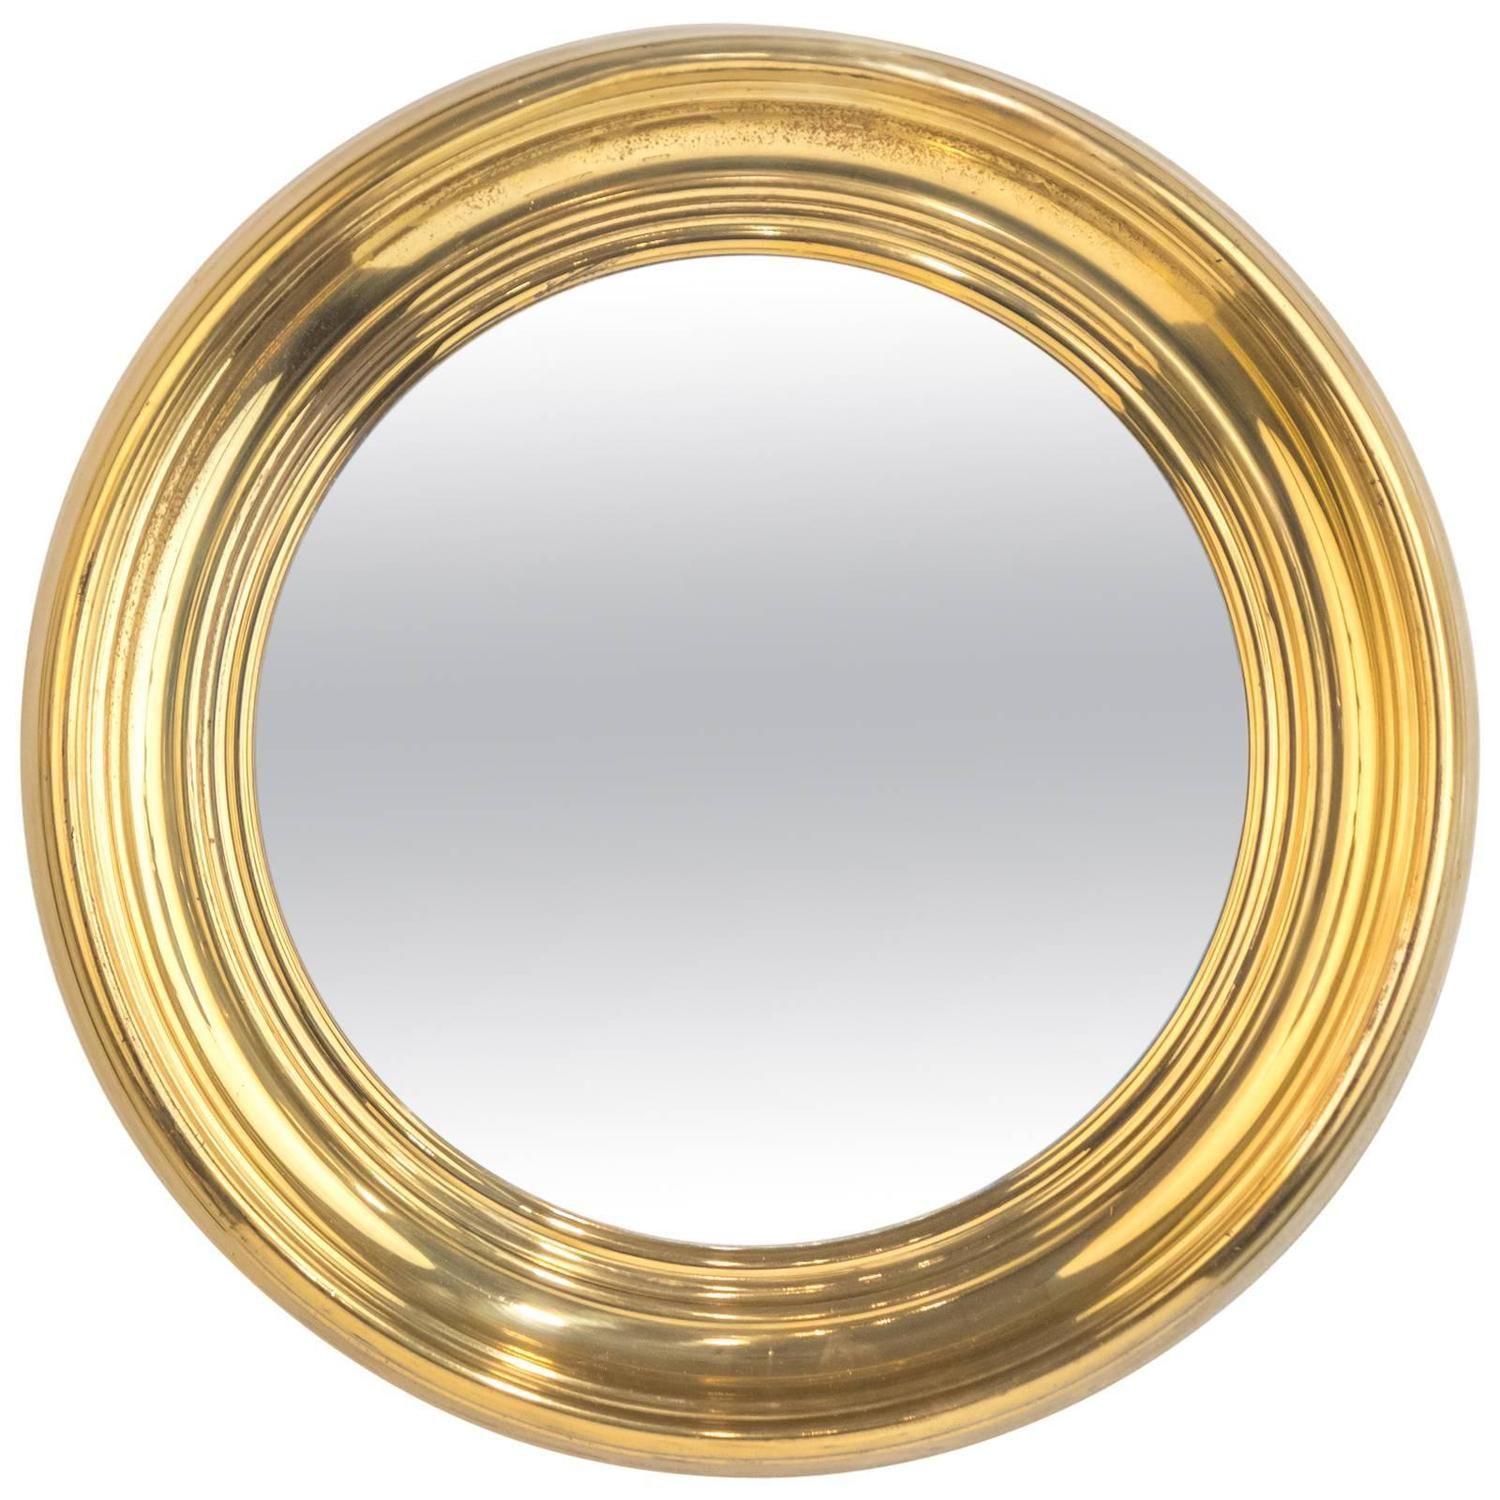 French Vintage Round Brass Mirror At 1stdibs With Antique Brass Wall Mirrors (View 12 of 15)